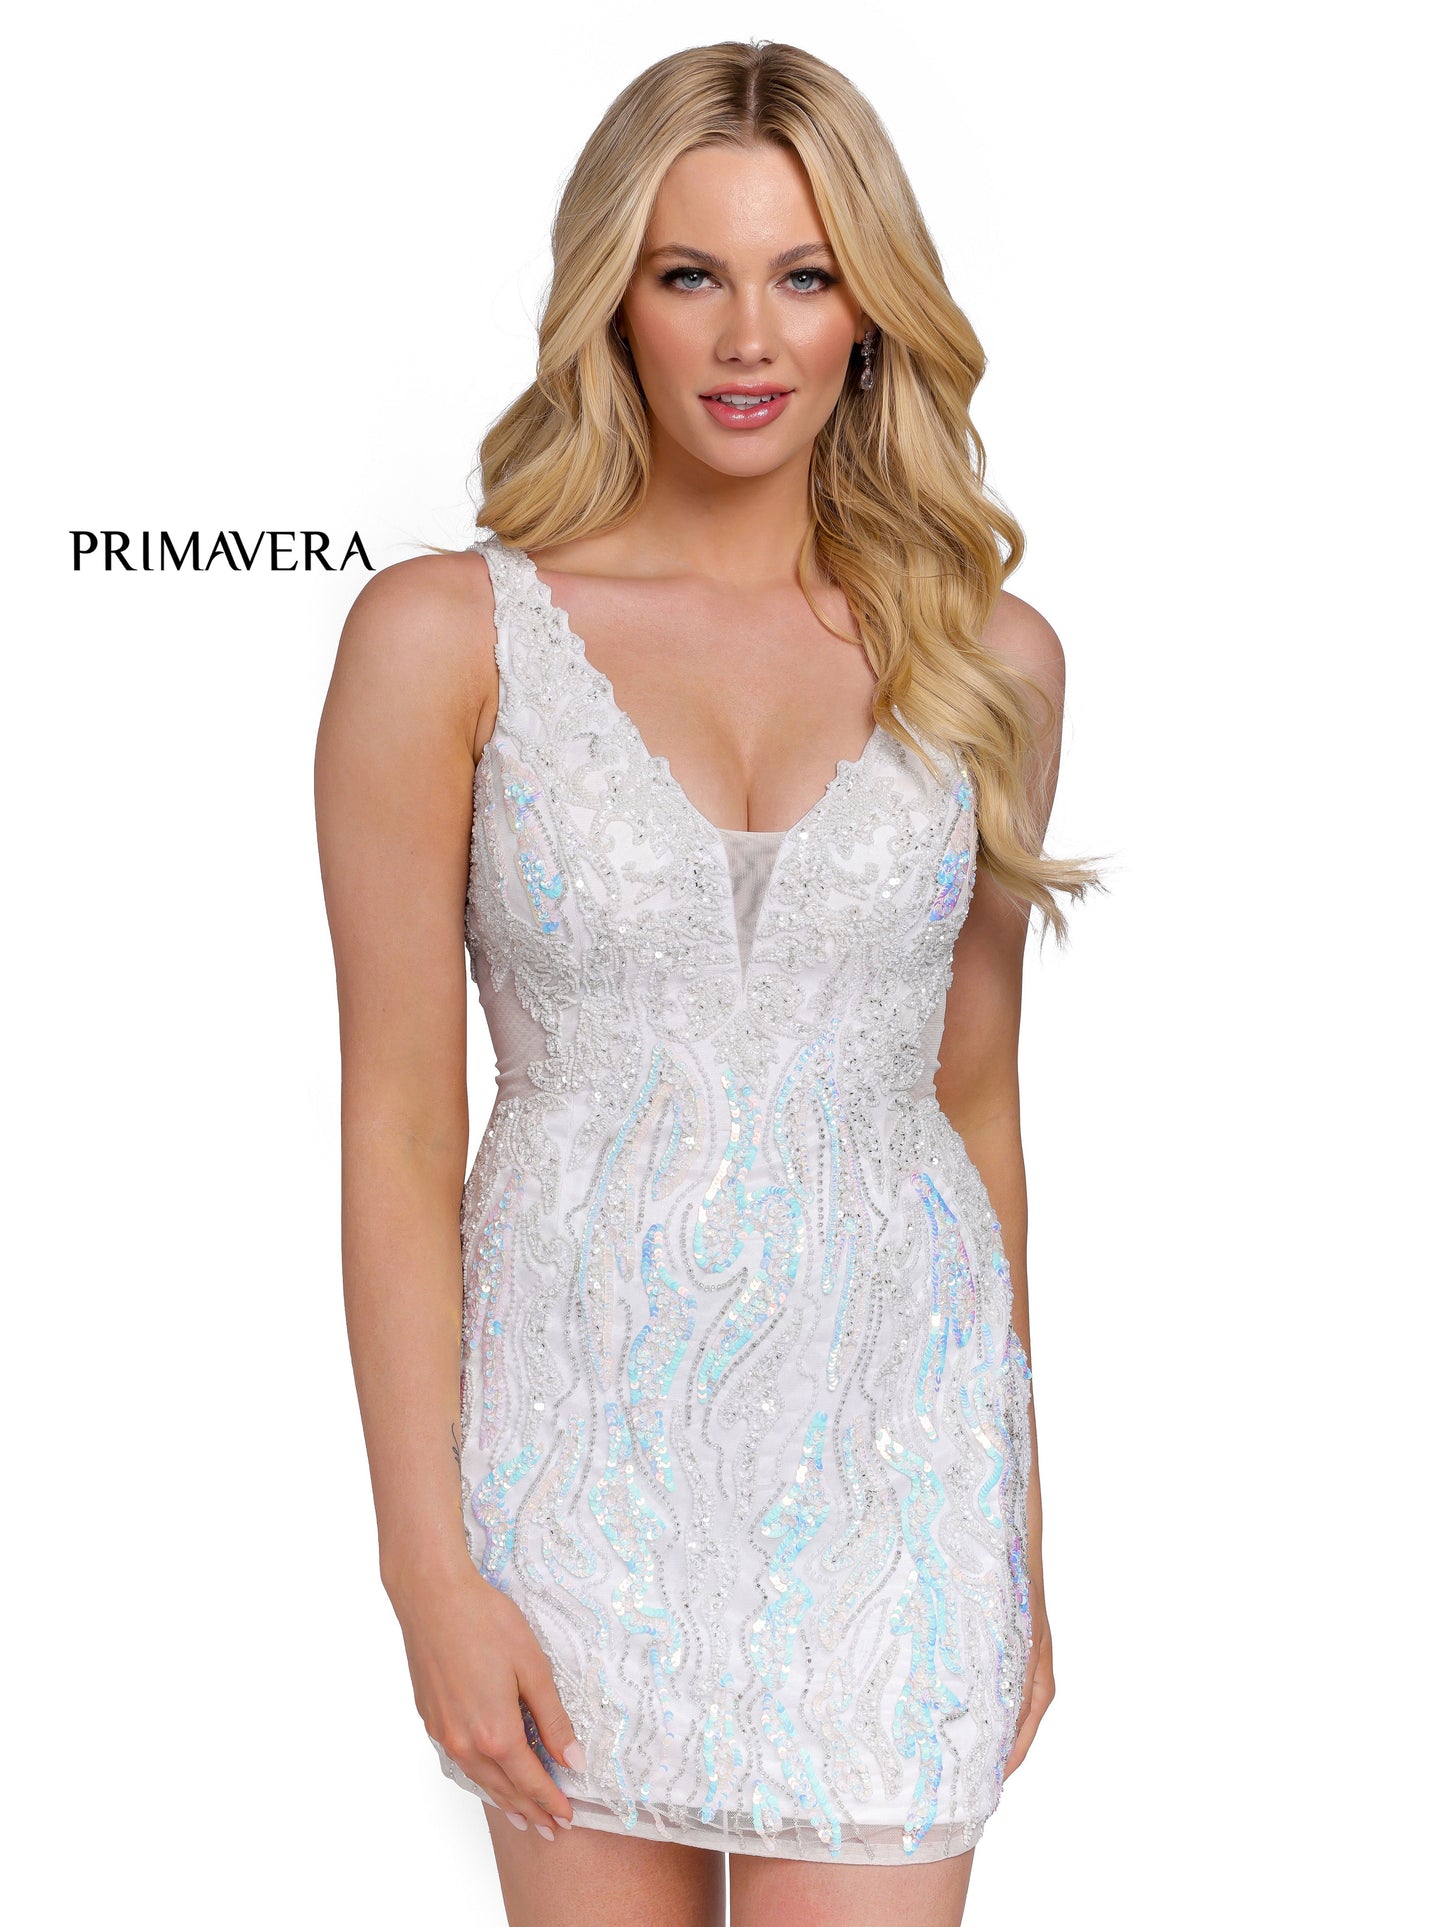 Primavera Couture 3822 Short 2022 Homecoming Dress Fitted Sequin Cocktail Dress  Available Color- Ivory  Available Size: 2